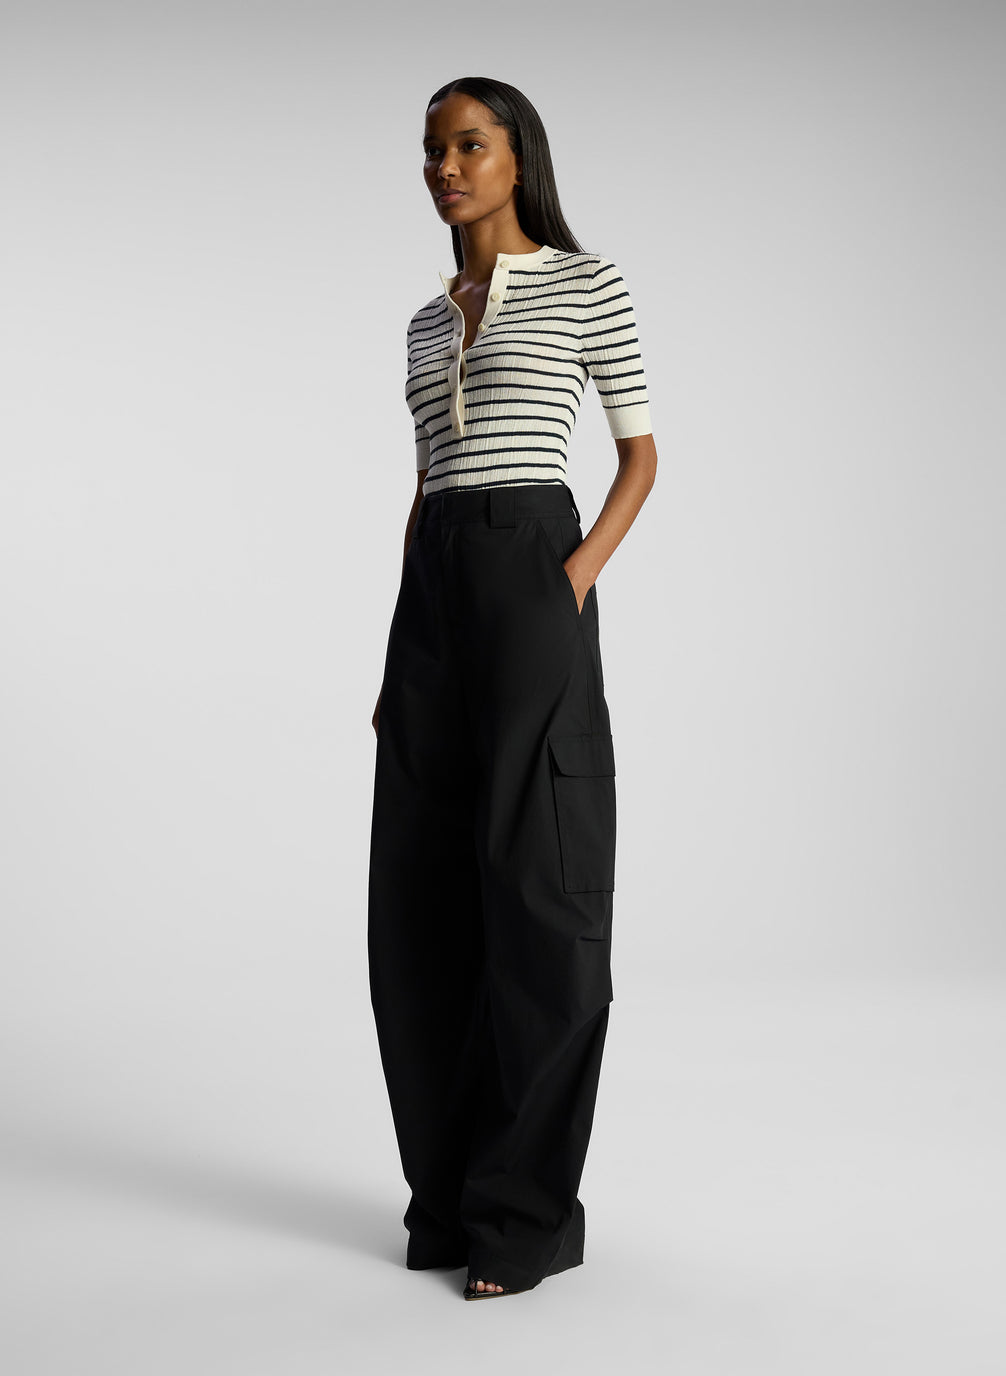 side view of woman wearing striped top and black cargo pants